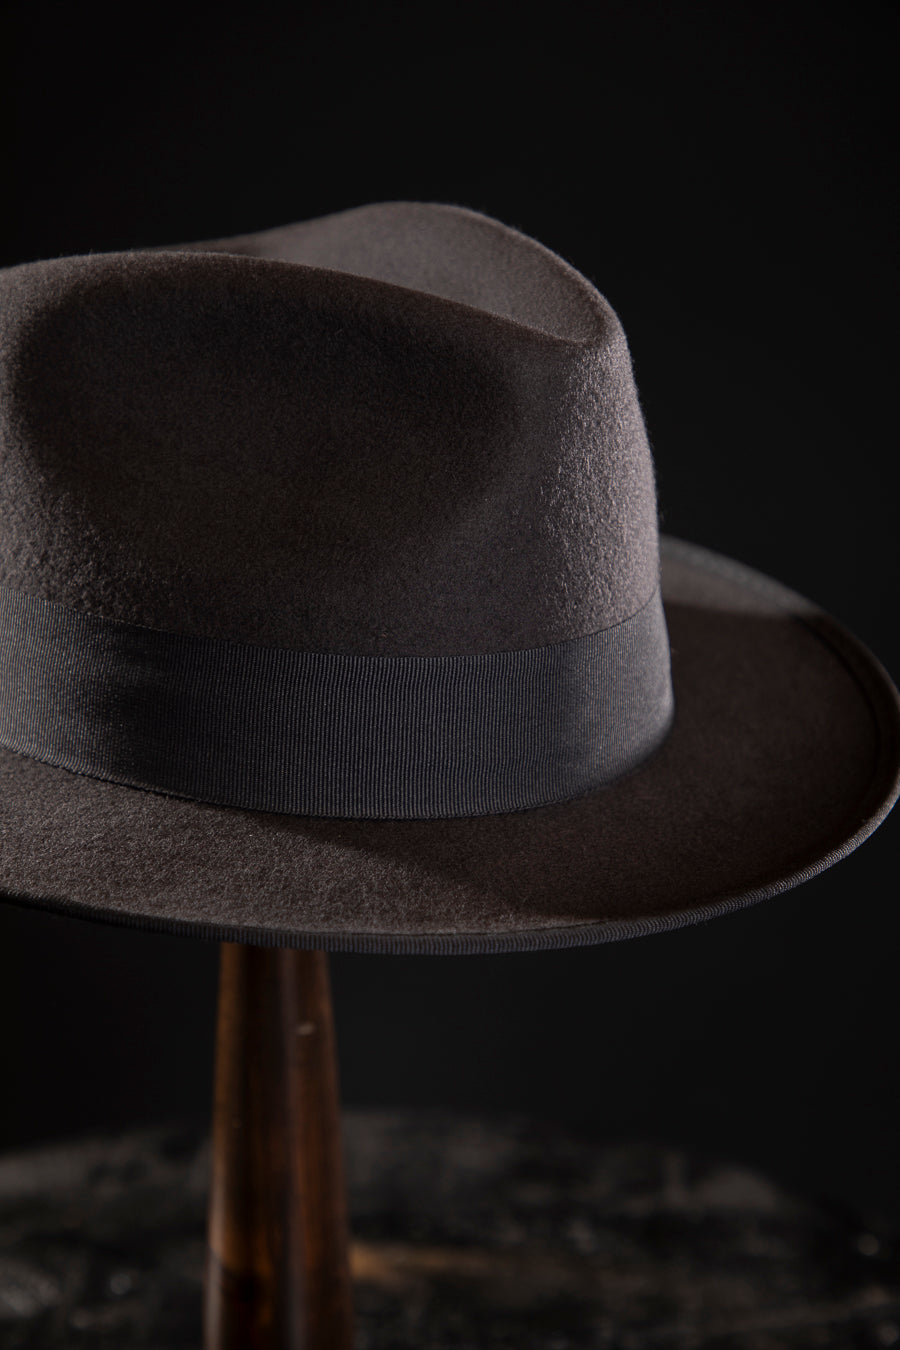 Woolen Fedora Grey - Deluxe, high-quality hats for men and women. Our collection of hats including wool felt top hats, fedoras, bowlers, caps, fedoras, trilbys, cloches and more are a wonderful addition to a 1920s Gangster or Gatsby costume, or the perfect fashion accessory. Shop online, or visit our Mornington hat store to see all that we have to offer.